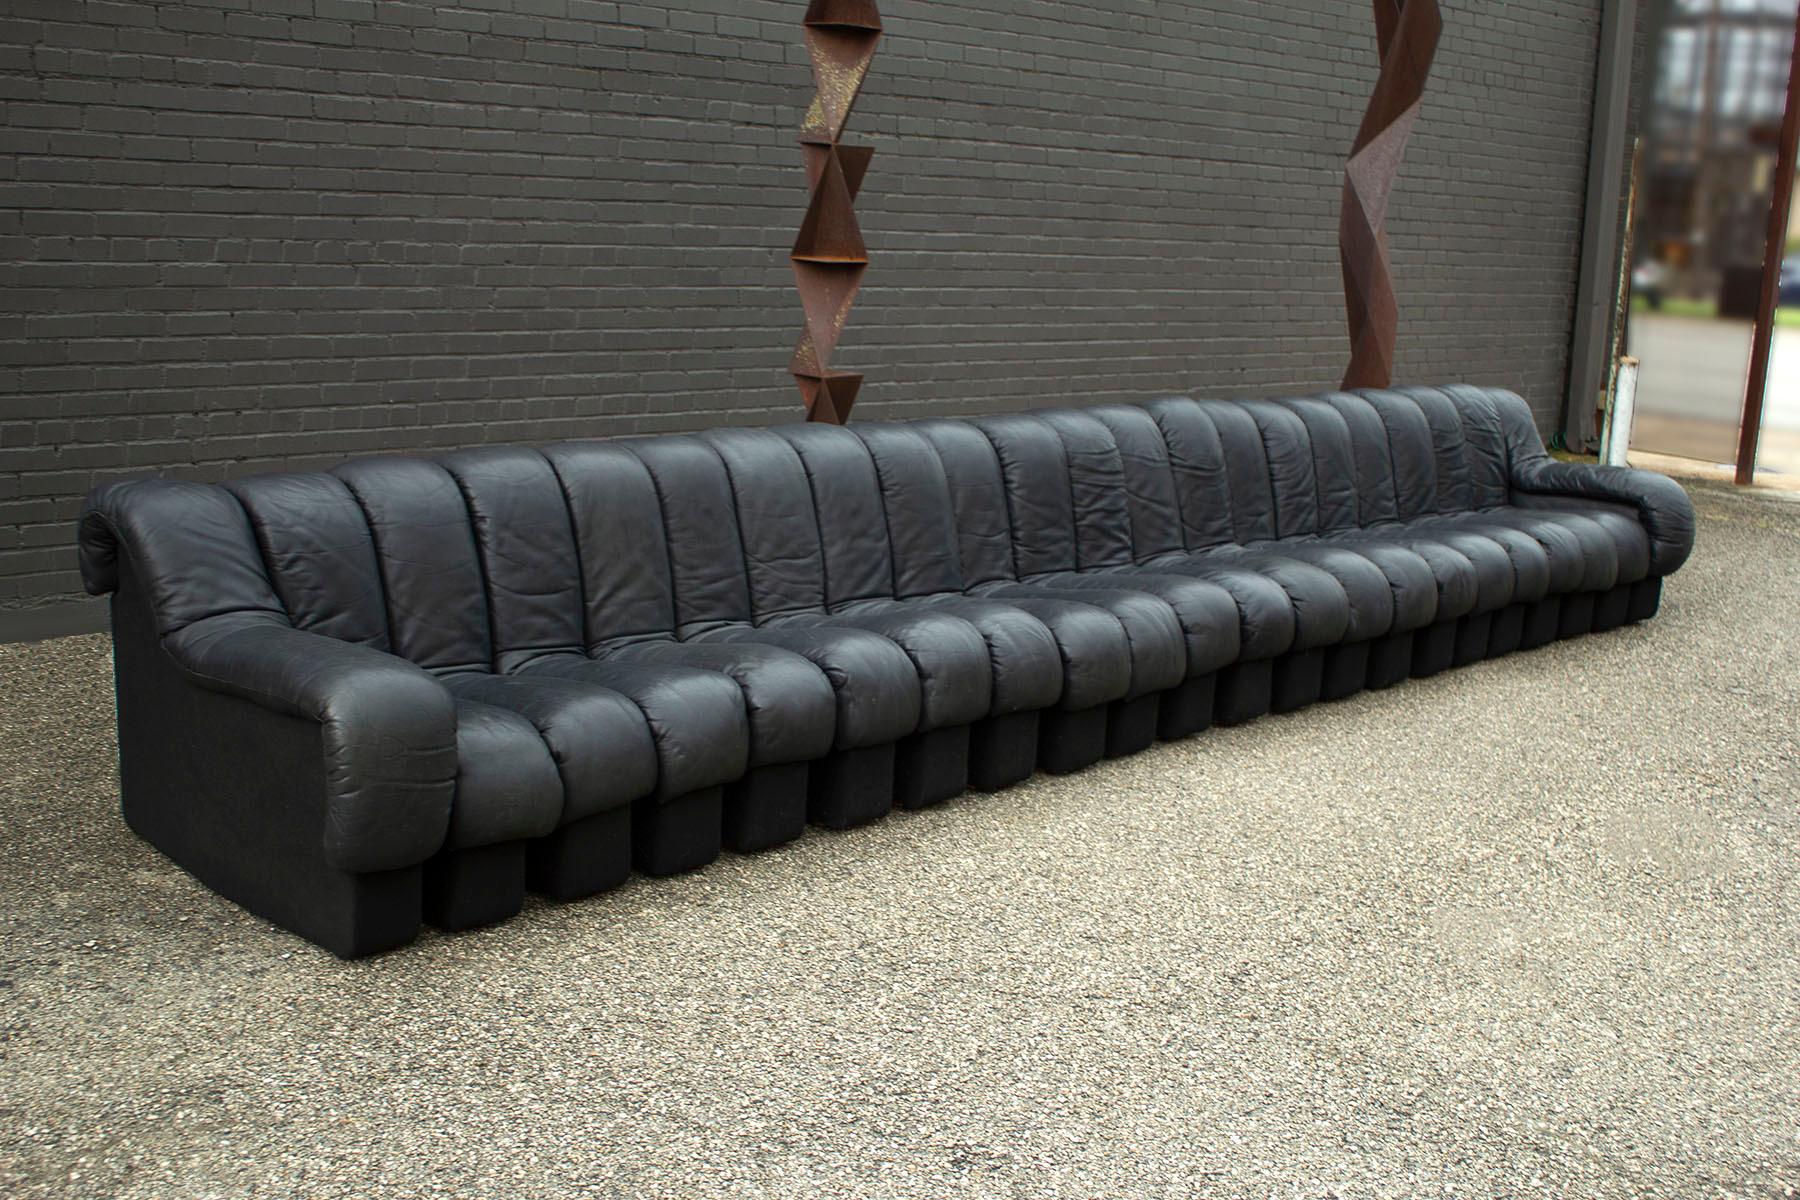 Swiss De Sede DS-600 'Non-Stop' Tatzelwurm Sectional Sofa in Black Leather 22 Sections